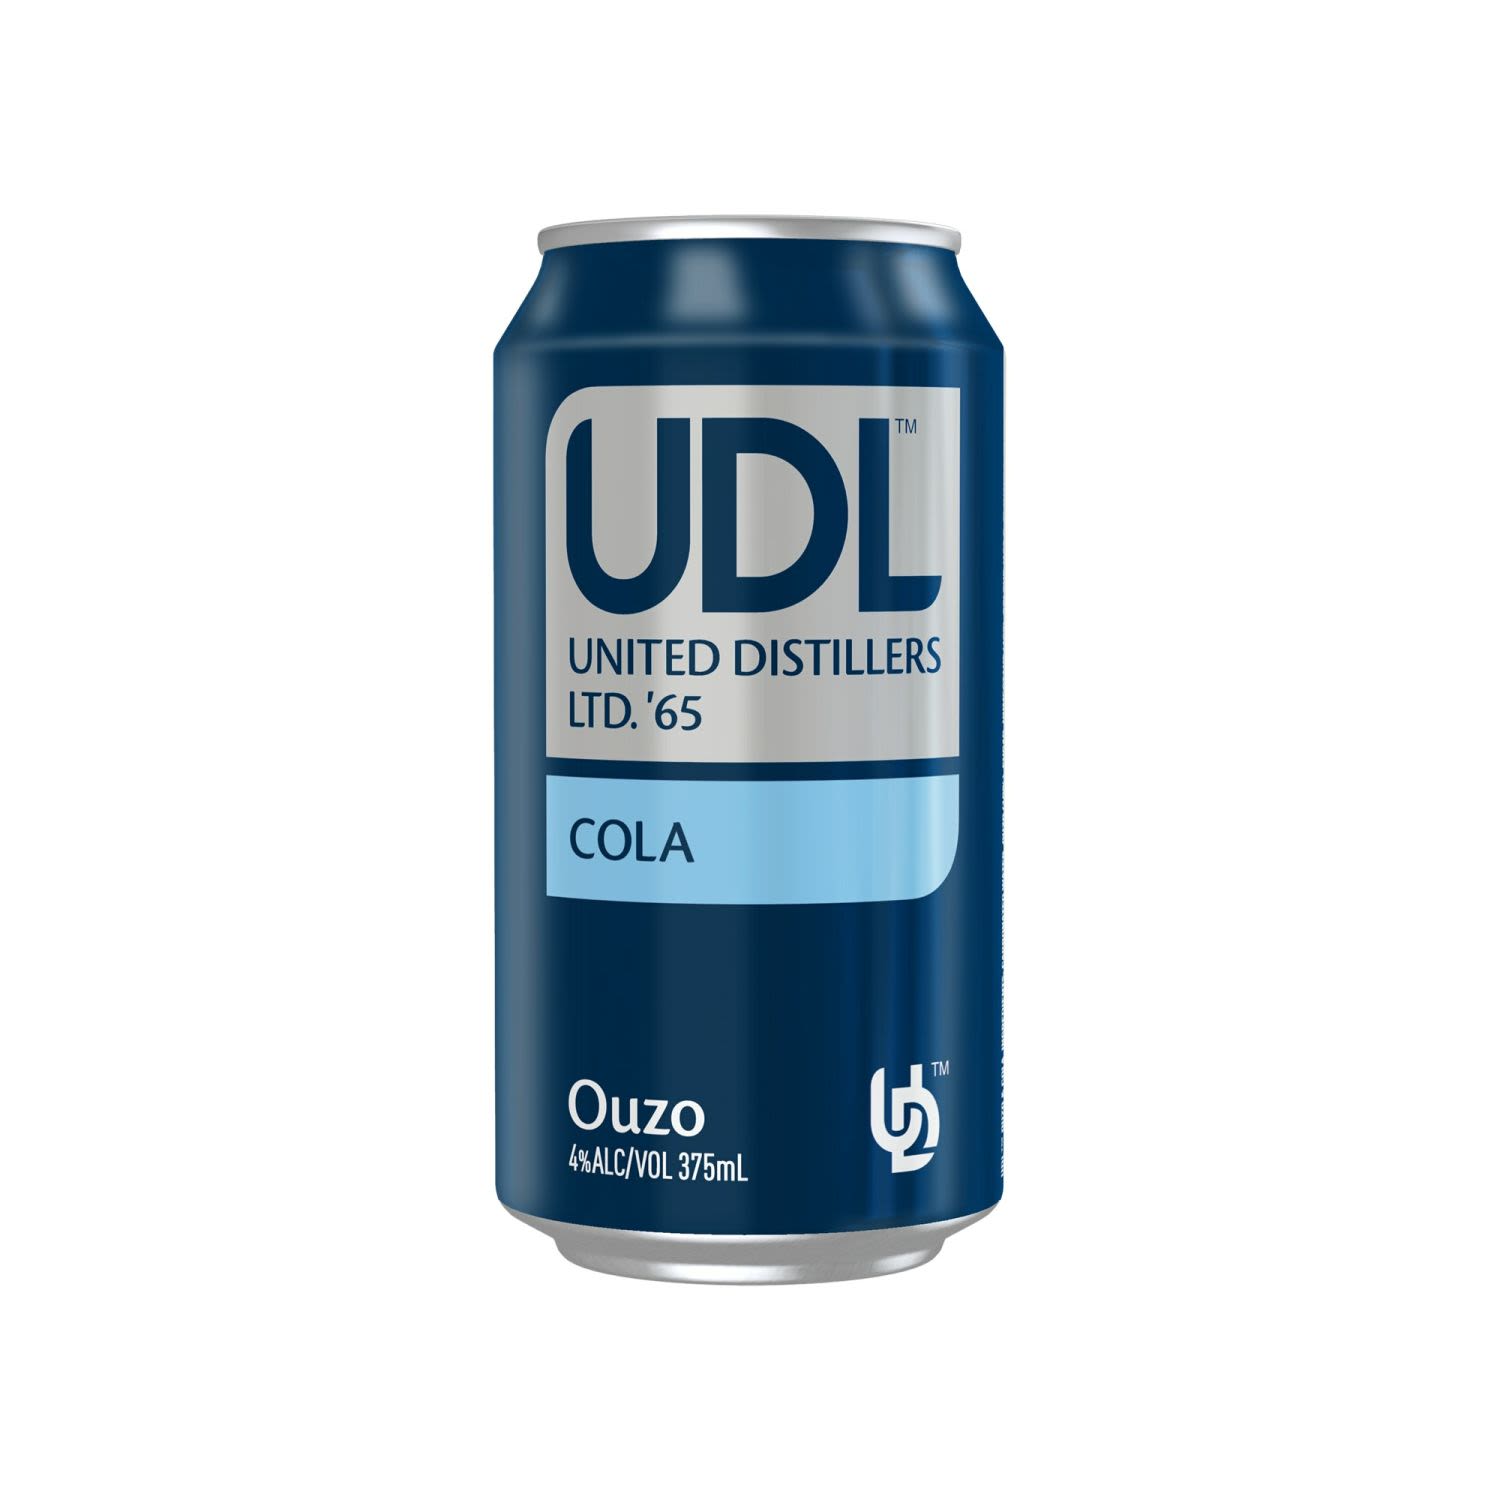 UDL Ouzo and Cola Cans 375mL<br /> <br />Alcohol Volume: 4.00%<br /><br />Pack Format: Can<br /><br />Standard Drinks: 1.3<br /><br />Pack Type: Can<br />